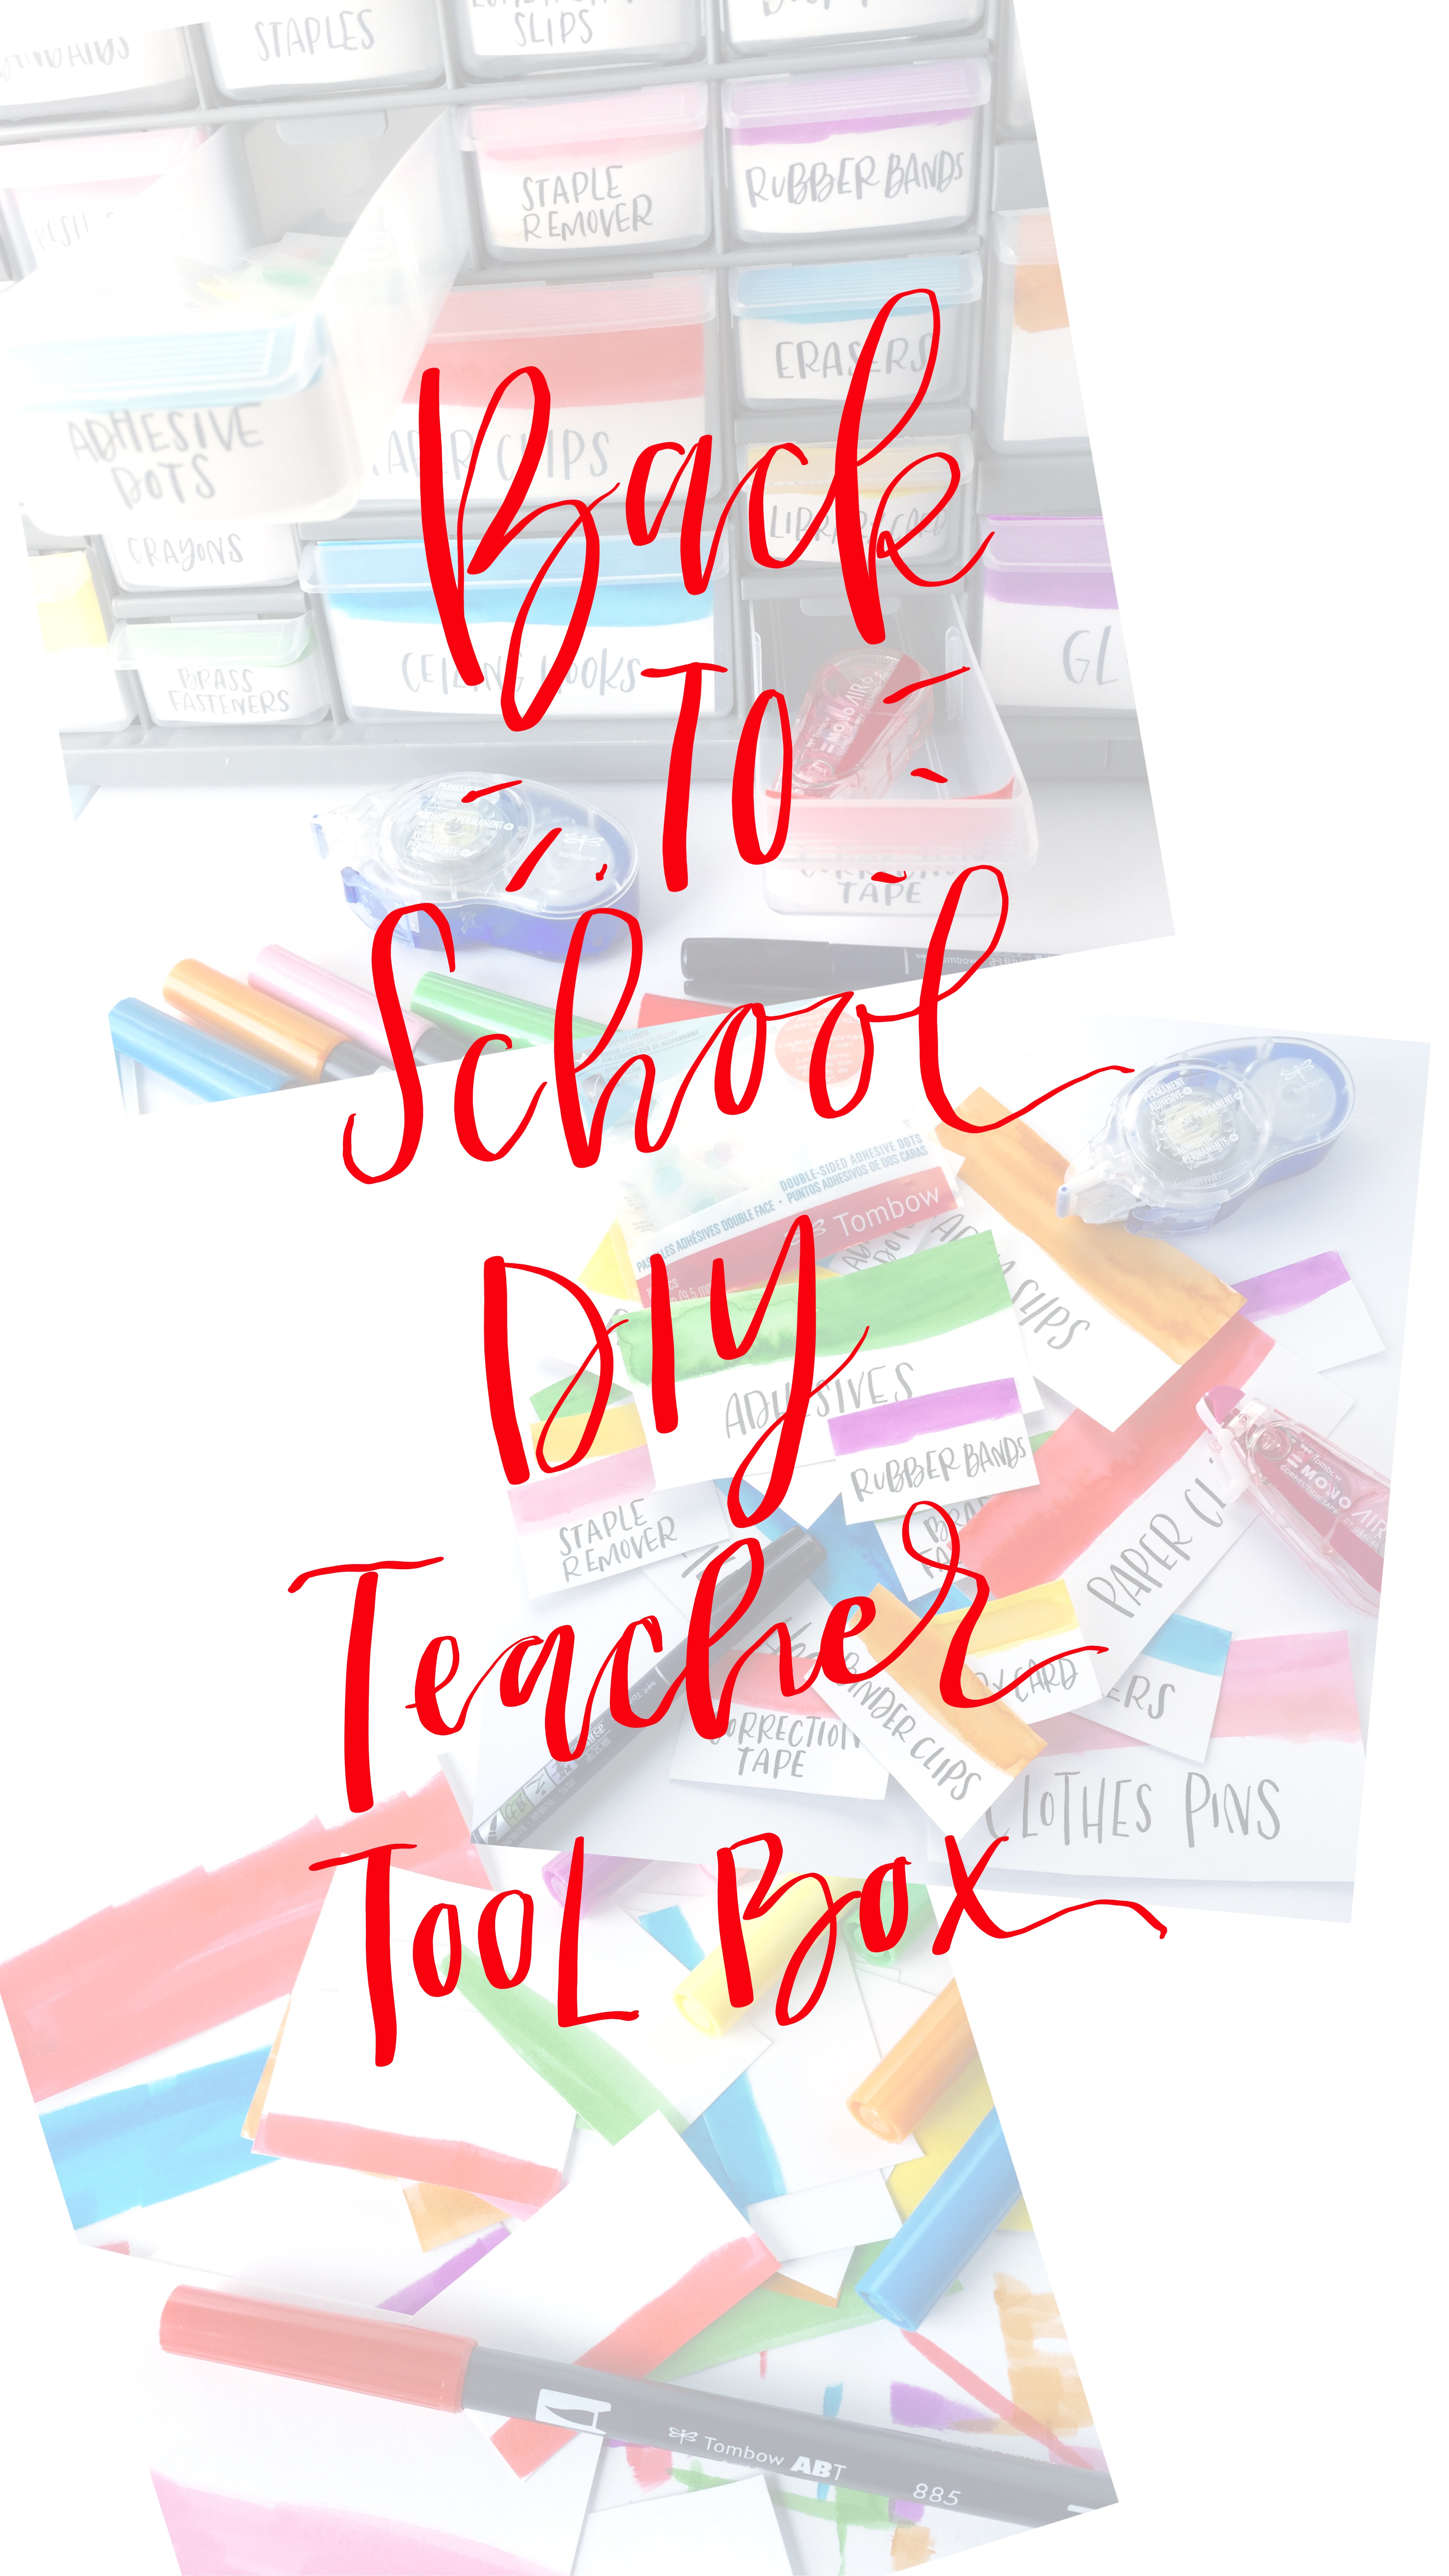 Lauren Fitzmaurice of @renmadecalligraphy shows you step by step how to create a teacher tool box that is perfect for back to school, using Tombow USA products. For more lettering and craft tips and tricks check out @renmadecalligraphy on instagram and renmadecalligraphy.com. 